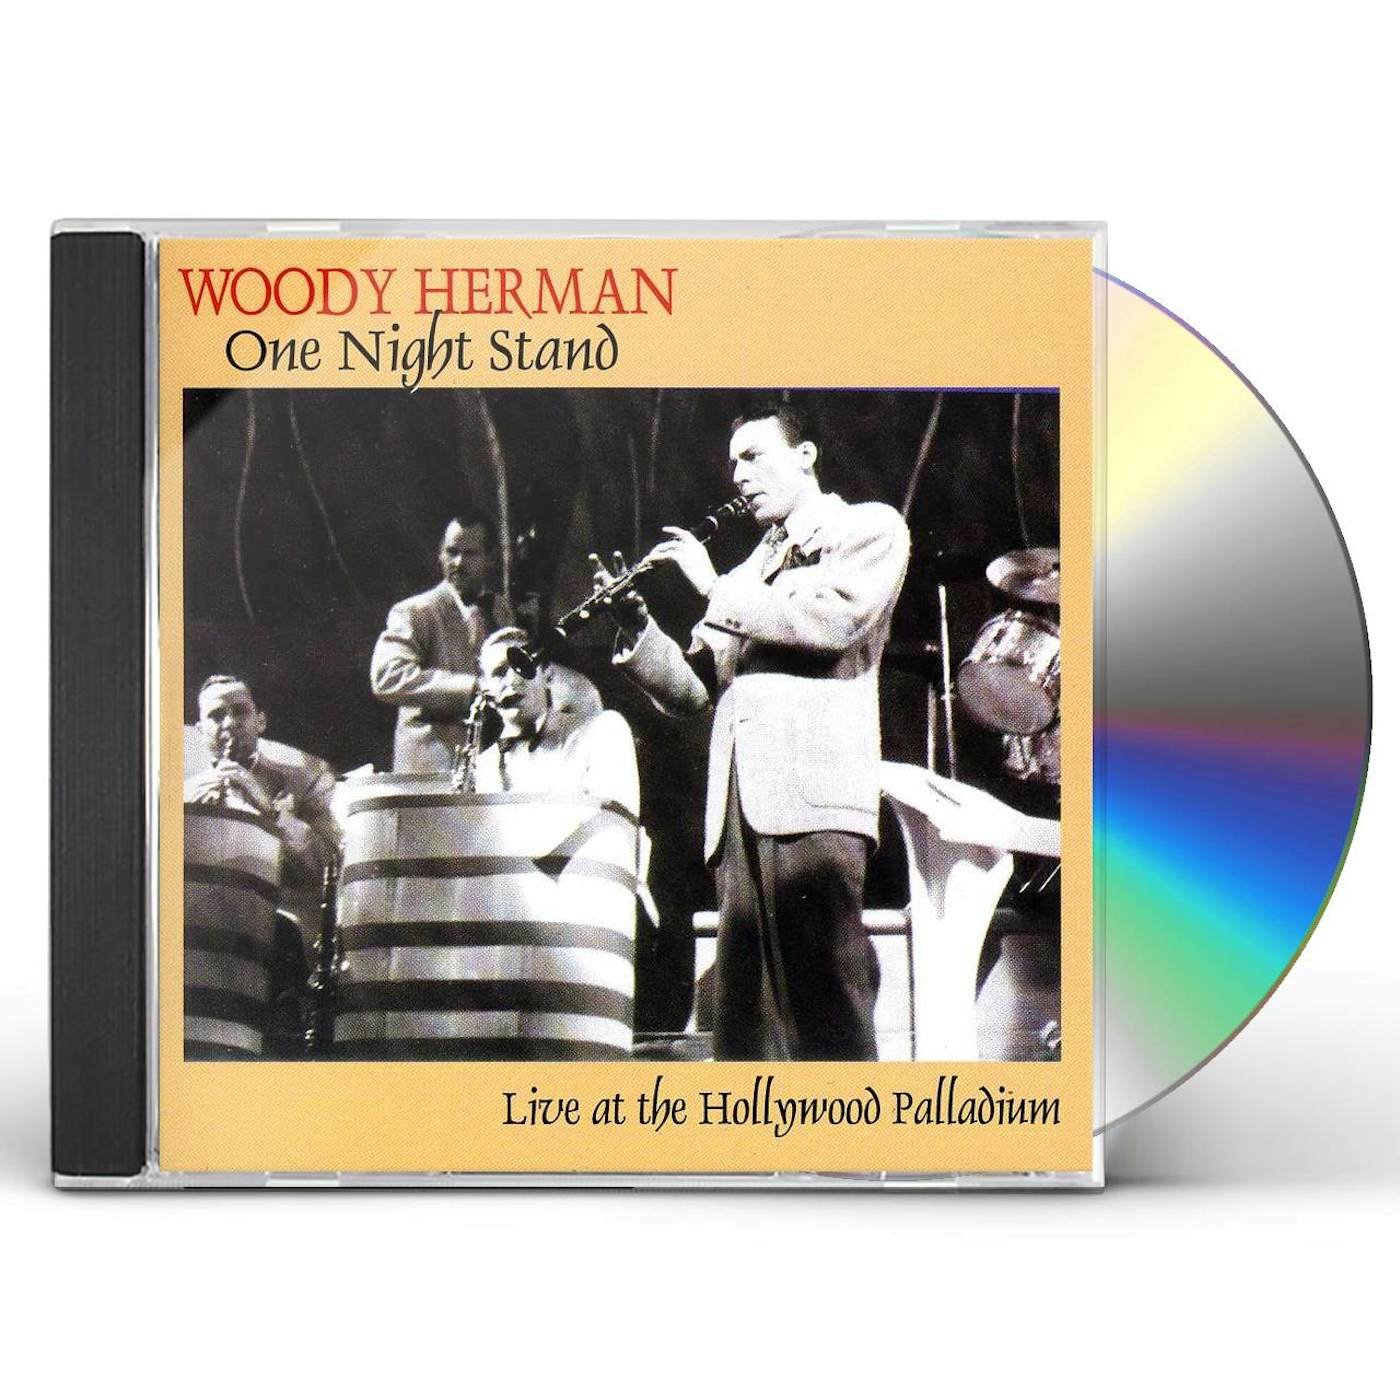 Woody Herman ONE NIGHT STAND: LIVE AT THE HOLLYWOOD PALLADIUM CD